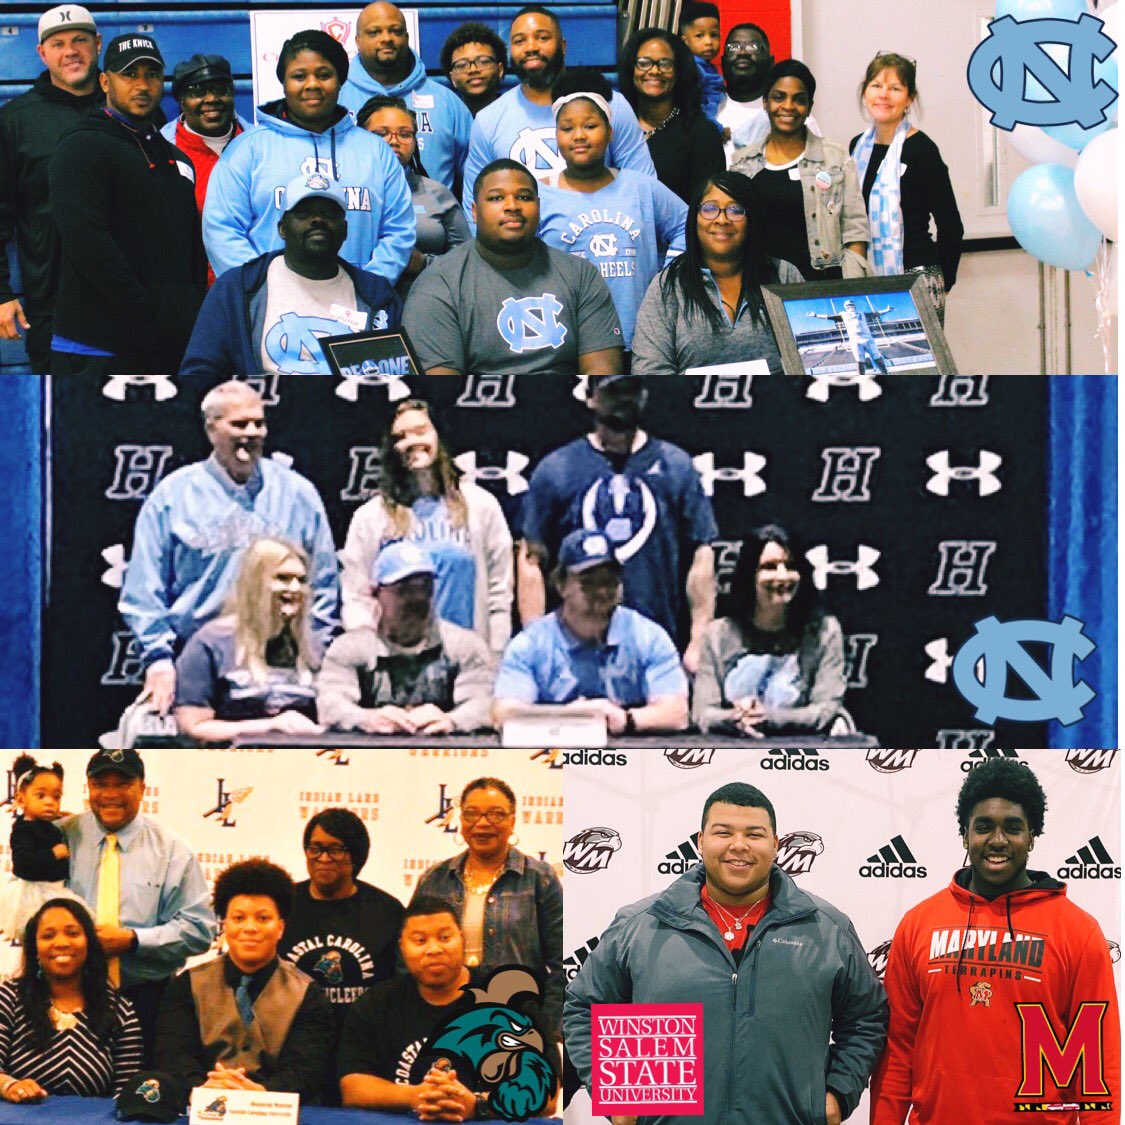 I would like to take this opportunity to congratulate our 2020 H.O.L.D family, who’ve embarked on the start of their next life journey with the signing of their NLI today. This is only the beginning fellas as you soar to higher heights. #ThisisH.O.L.D